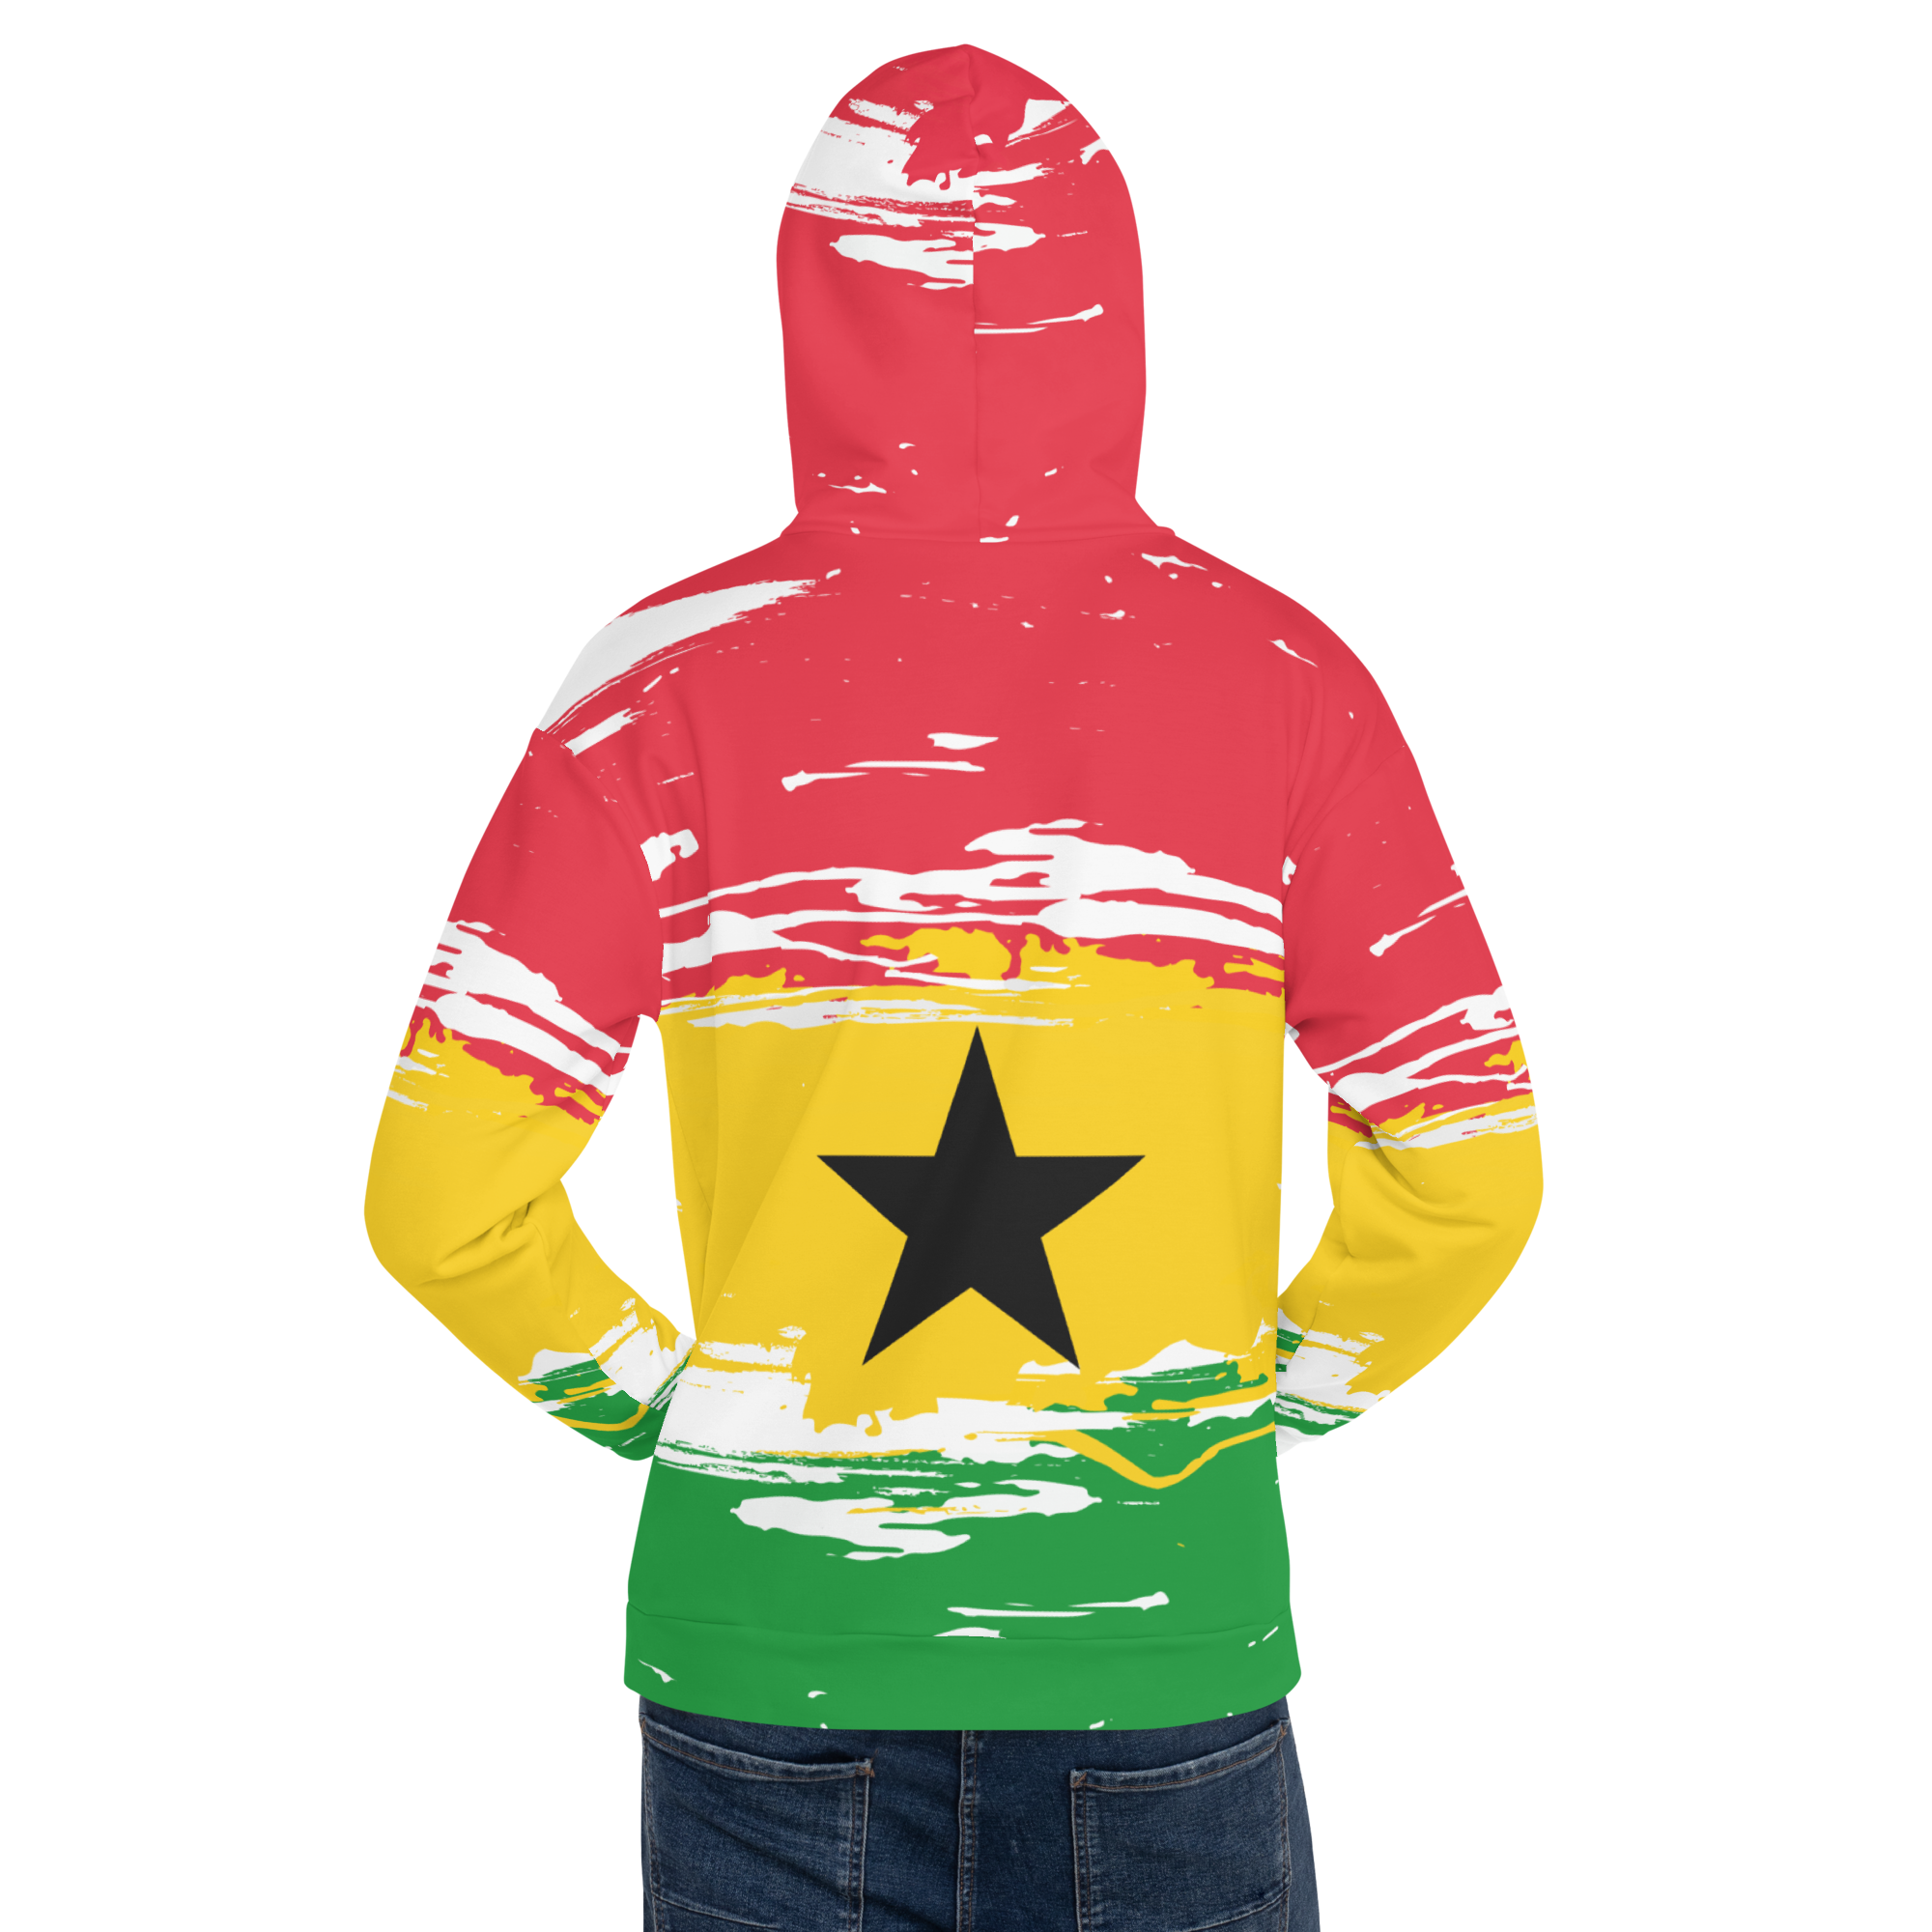 New 2023 arrivals! My colorful Ghana flag inspired unisex oversized volleyball team hoodies by Volleybragswag are now sold on ETSY!